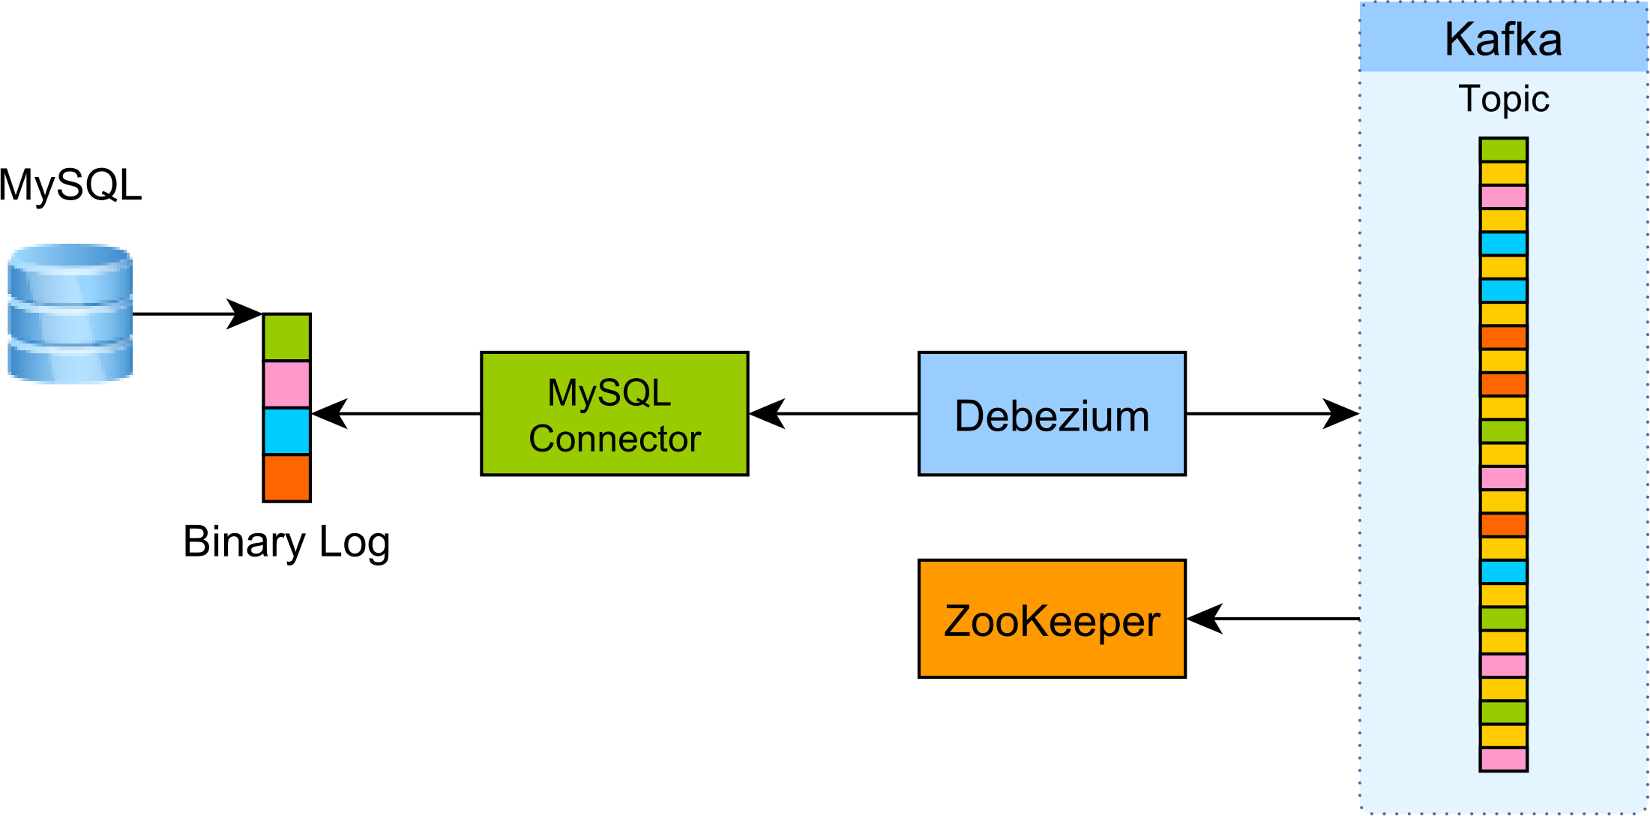 How to extract change data events from MySQL to Kafka using Debezium